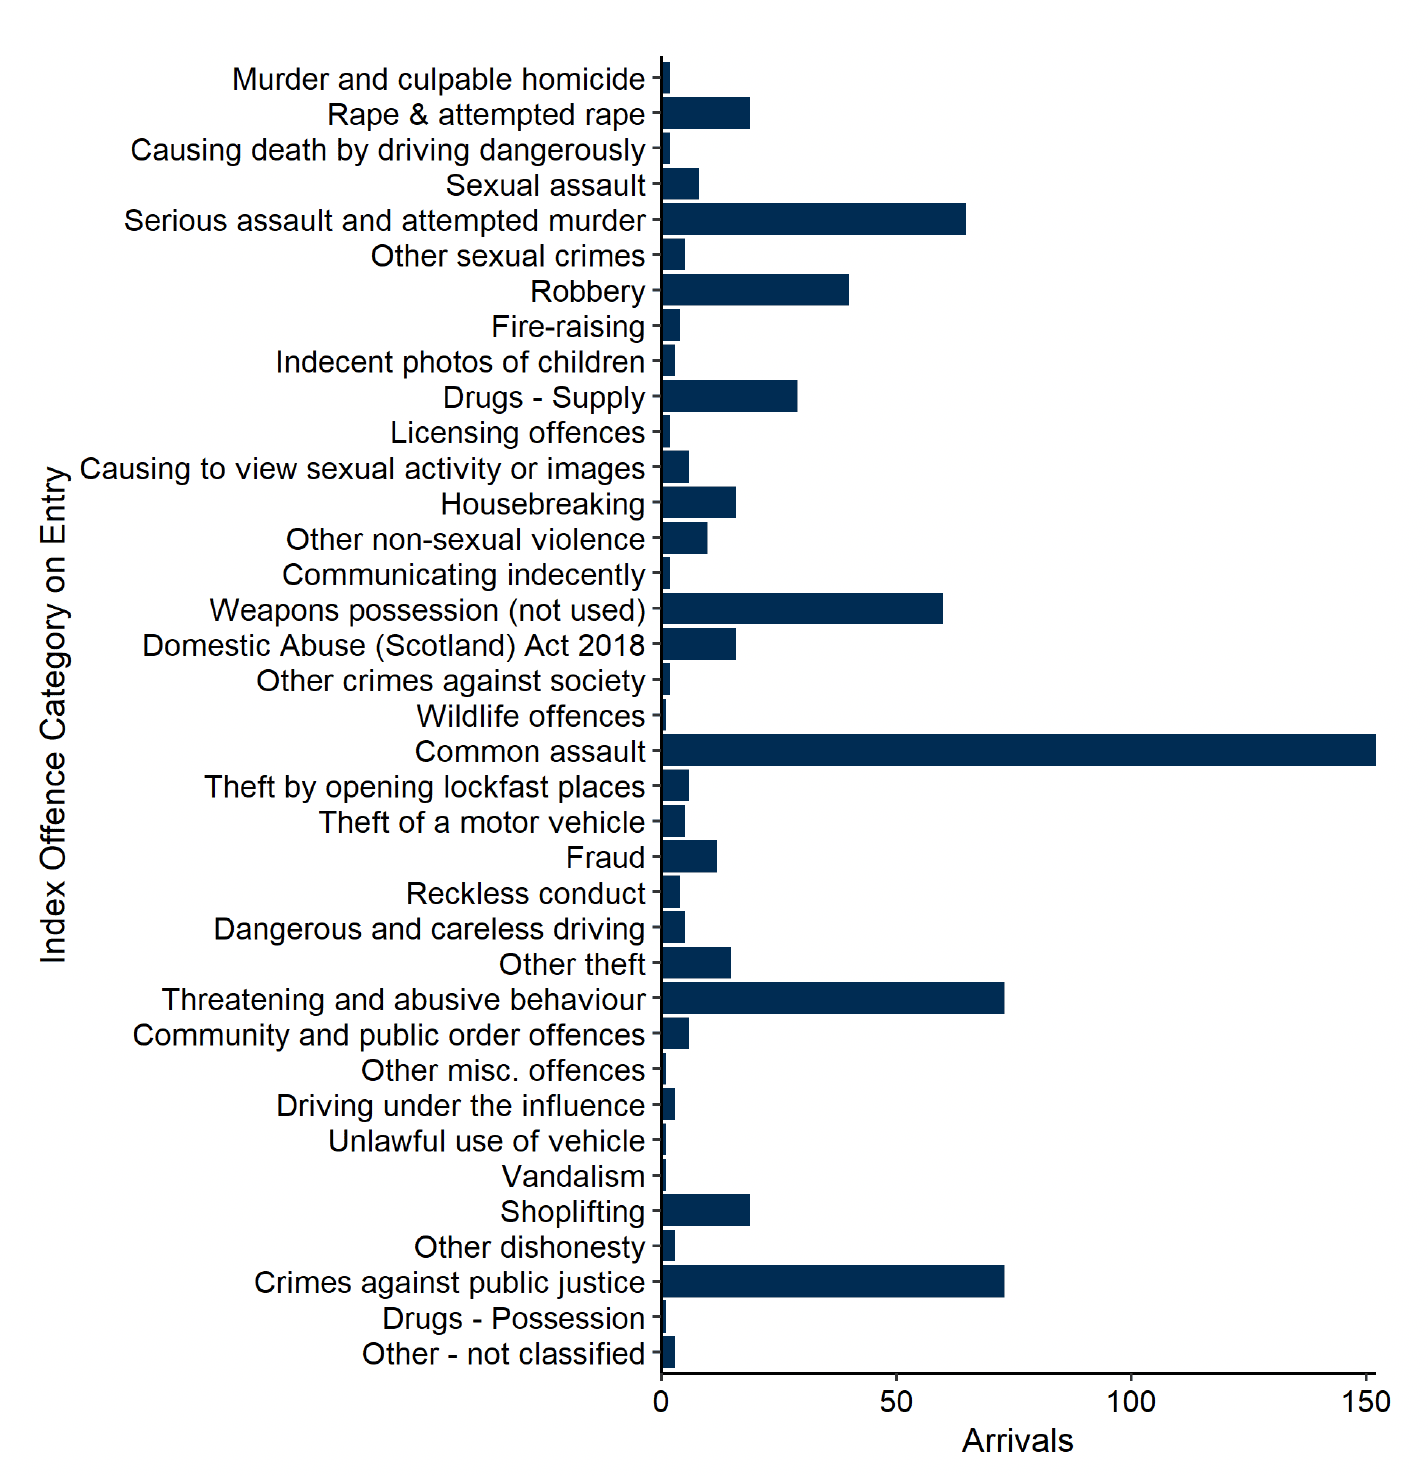 The index offences of the 675 arriving to untried and convicted awaiting sentence legal statuses in July. Most common was Common assault (152 in total), followed by Threatening and abusive behaviour (73), Crimes against public justice (73), Serious assault and attempted murder (65) and then Weapons possession (60). Last updated August 2022. Next update due September 2022.